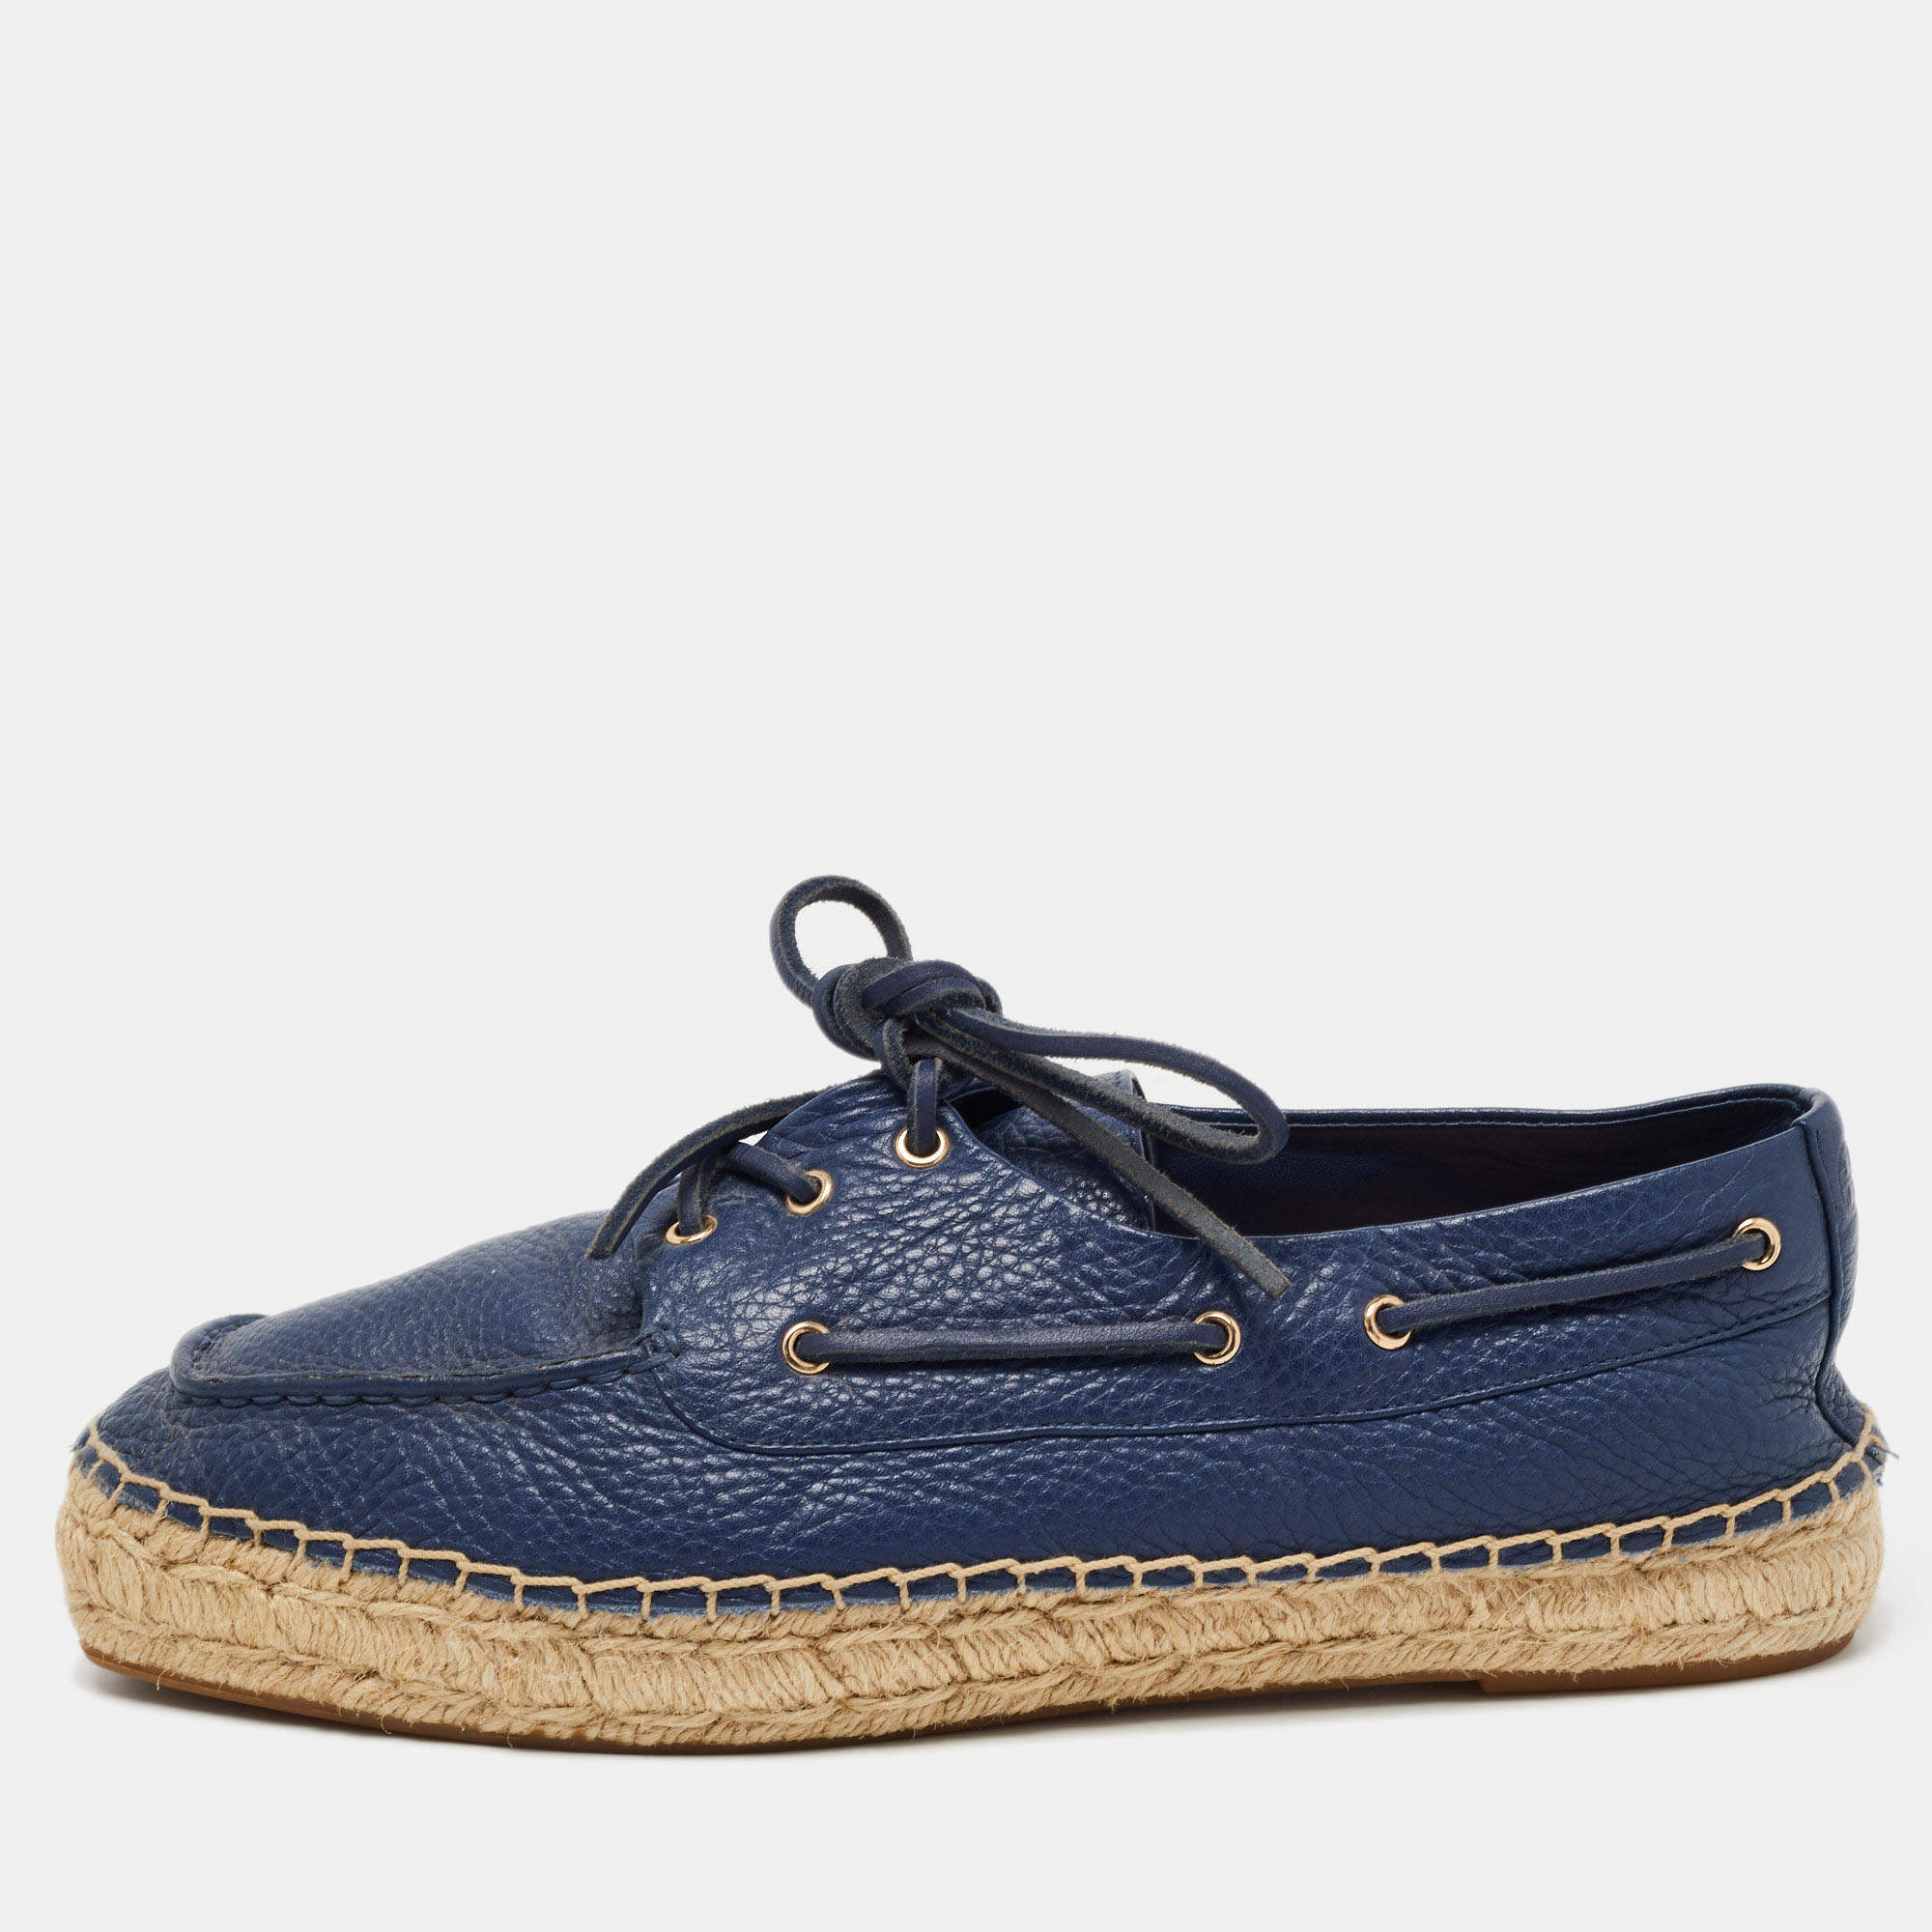 Tory Burch Navy Blue Leather Lace Up Espadrille Flats Size 41 Tory Burch |  TLC